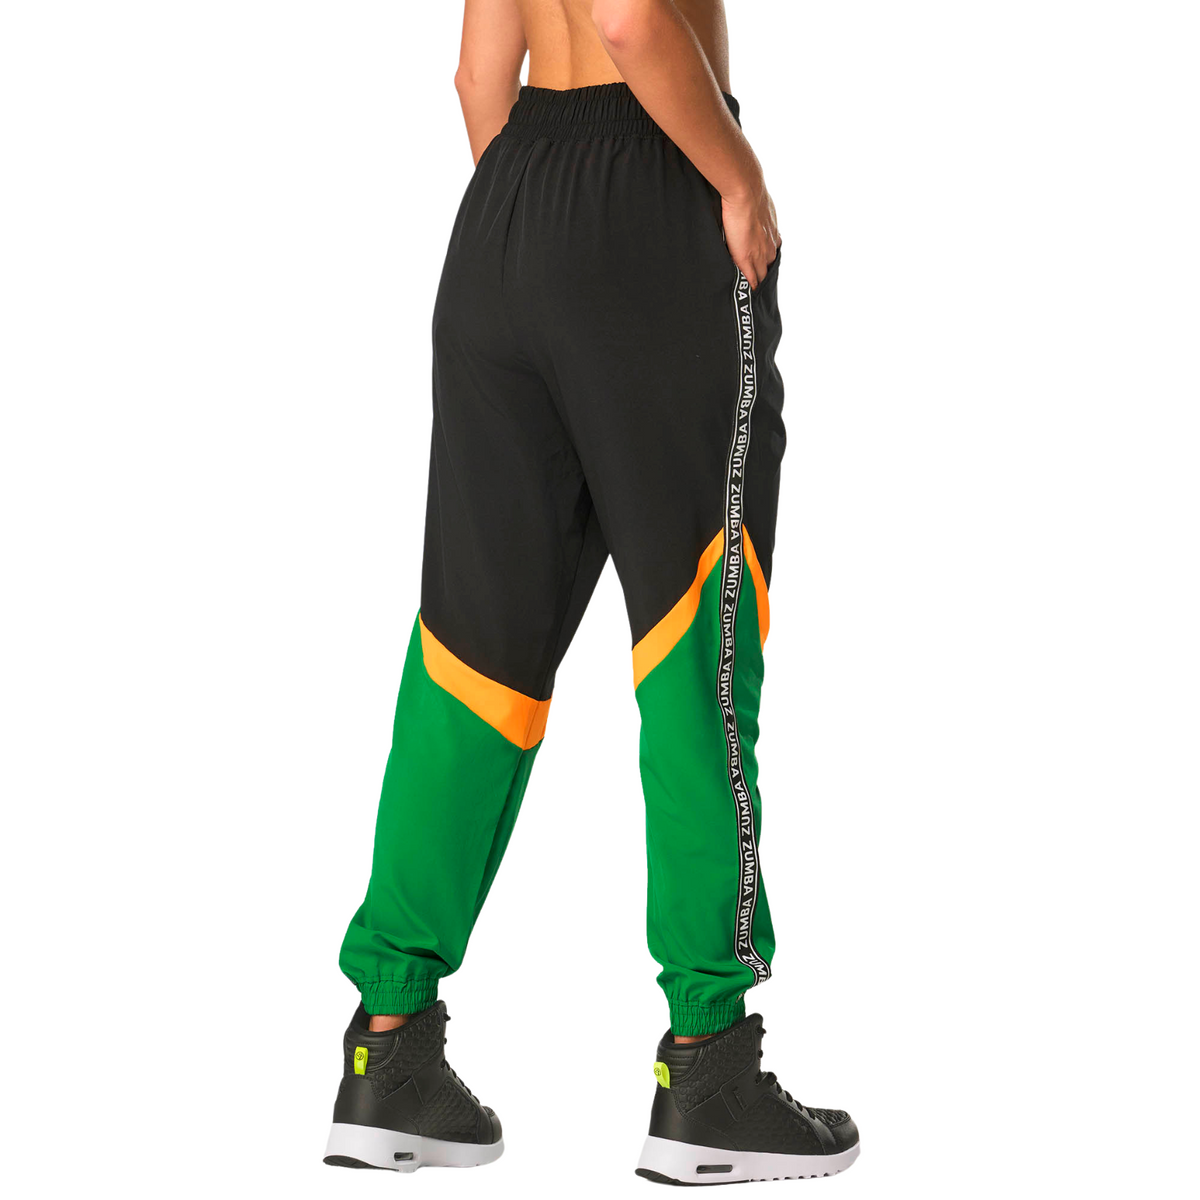 Zumba Forever Panel Track Pants - Bold Black / Cherry Red